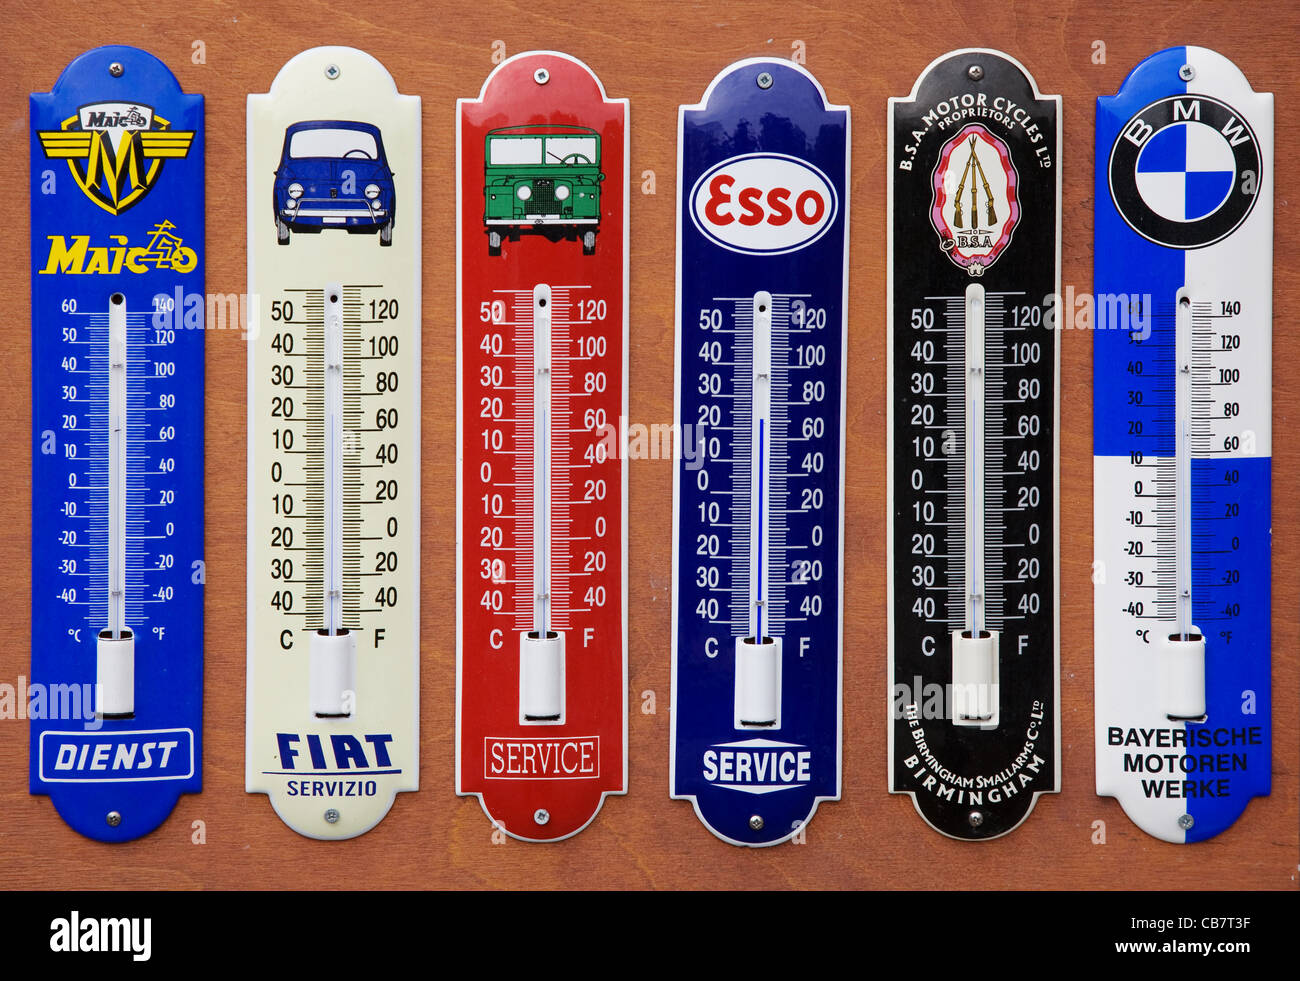 Retro Outdoor Thermometers